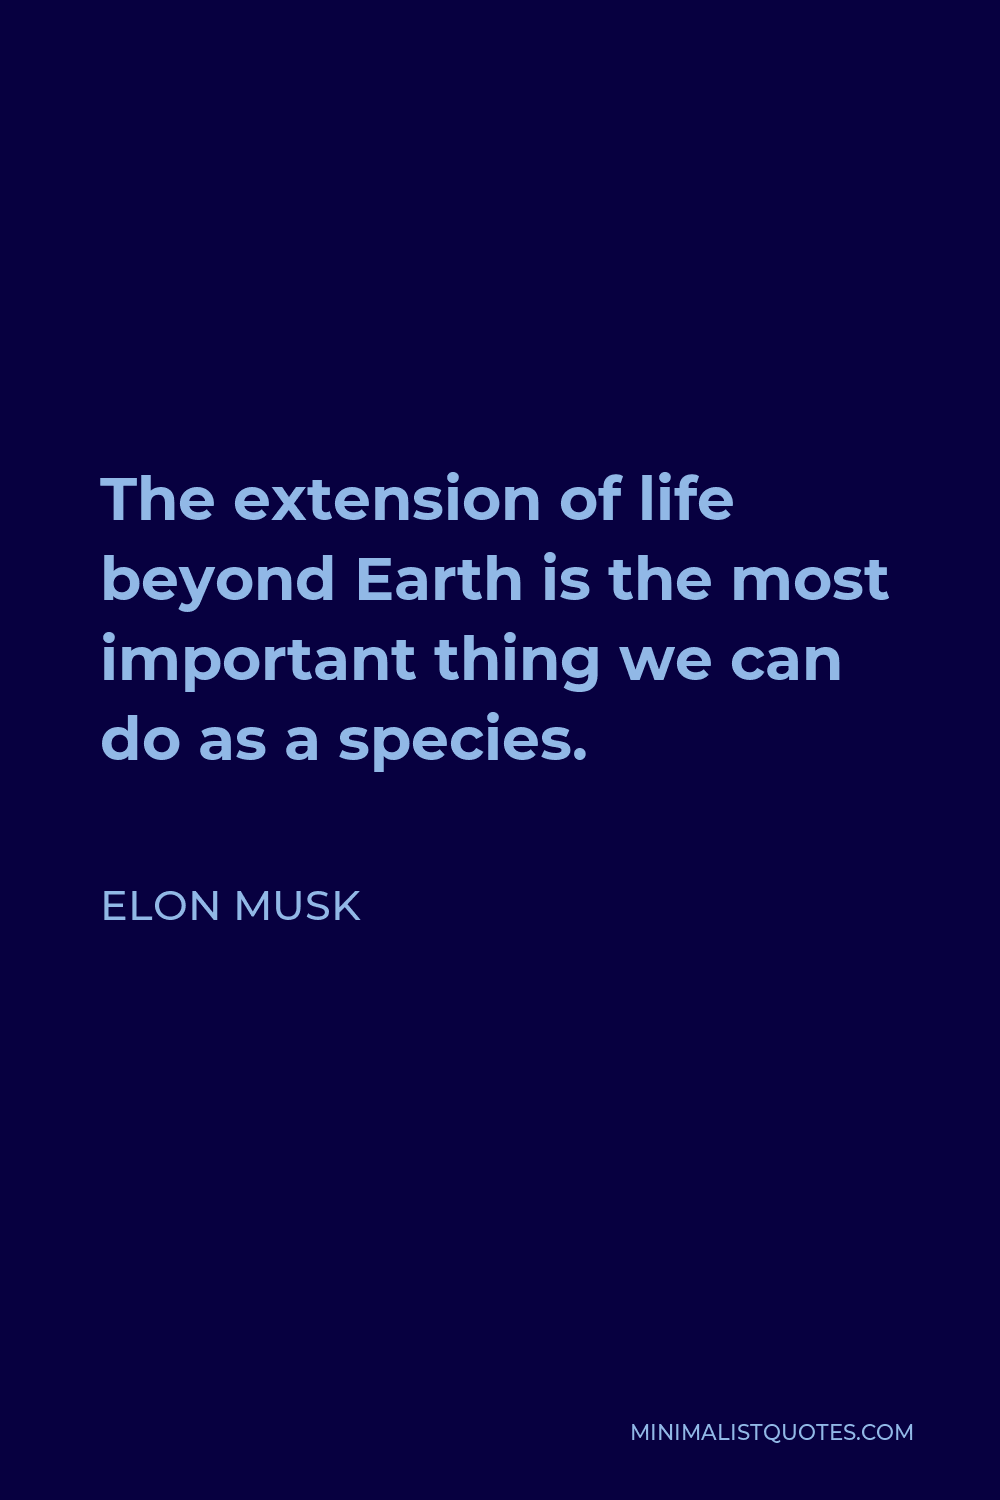 Elon Musk Quote - The extension of life beyond Earth is the most important thing we can do as a species.